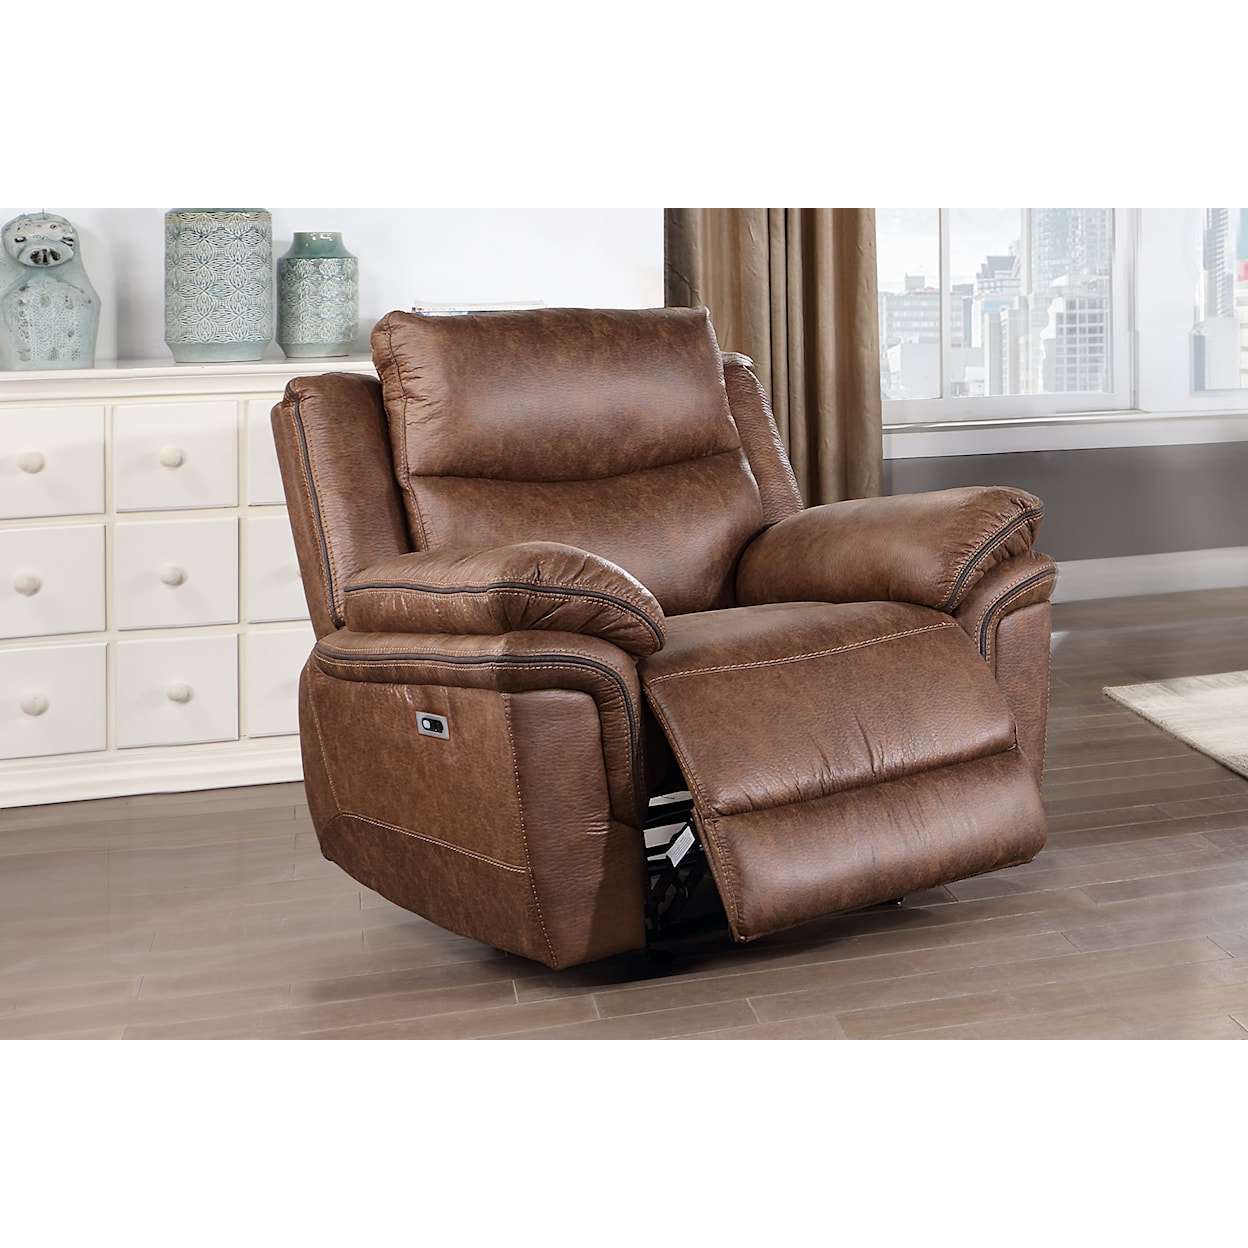 New Classic Ryland Power Recliner